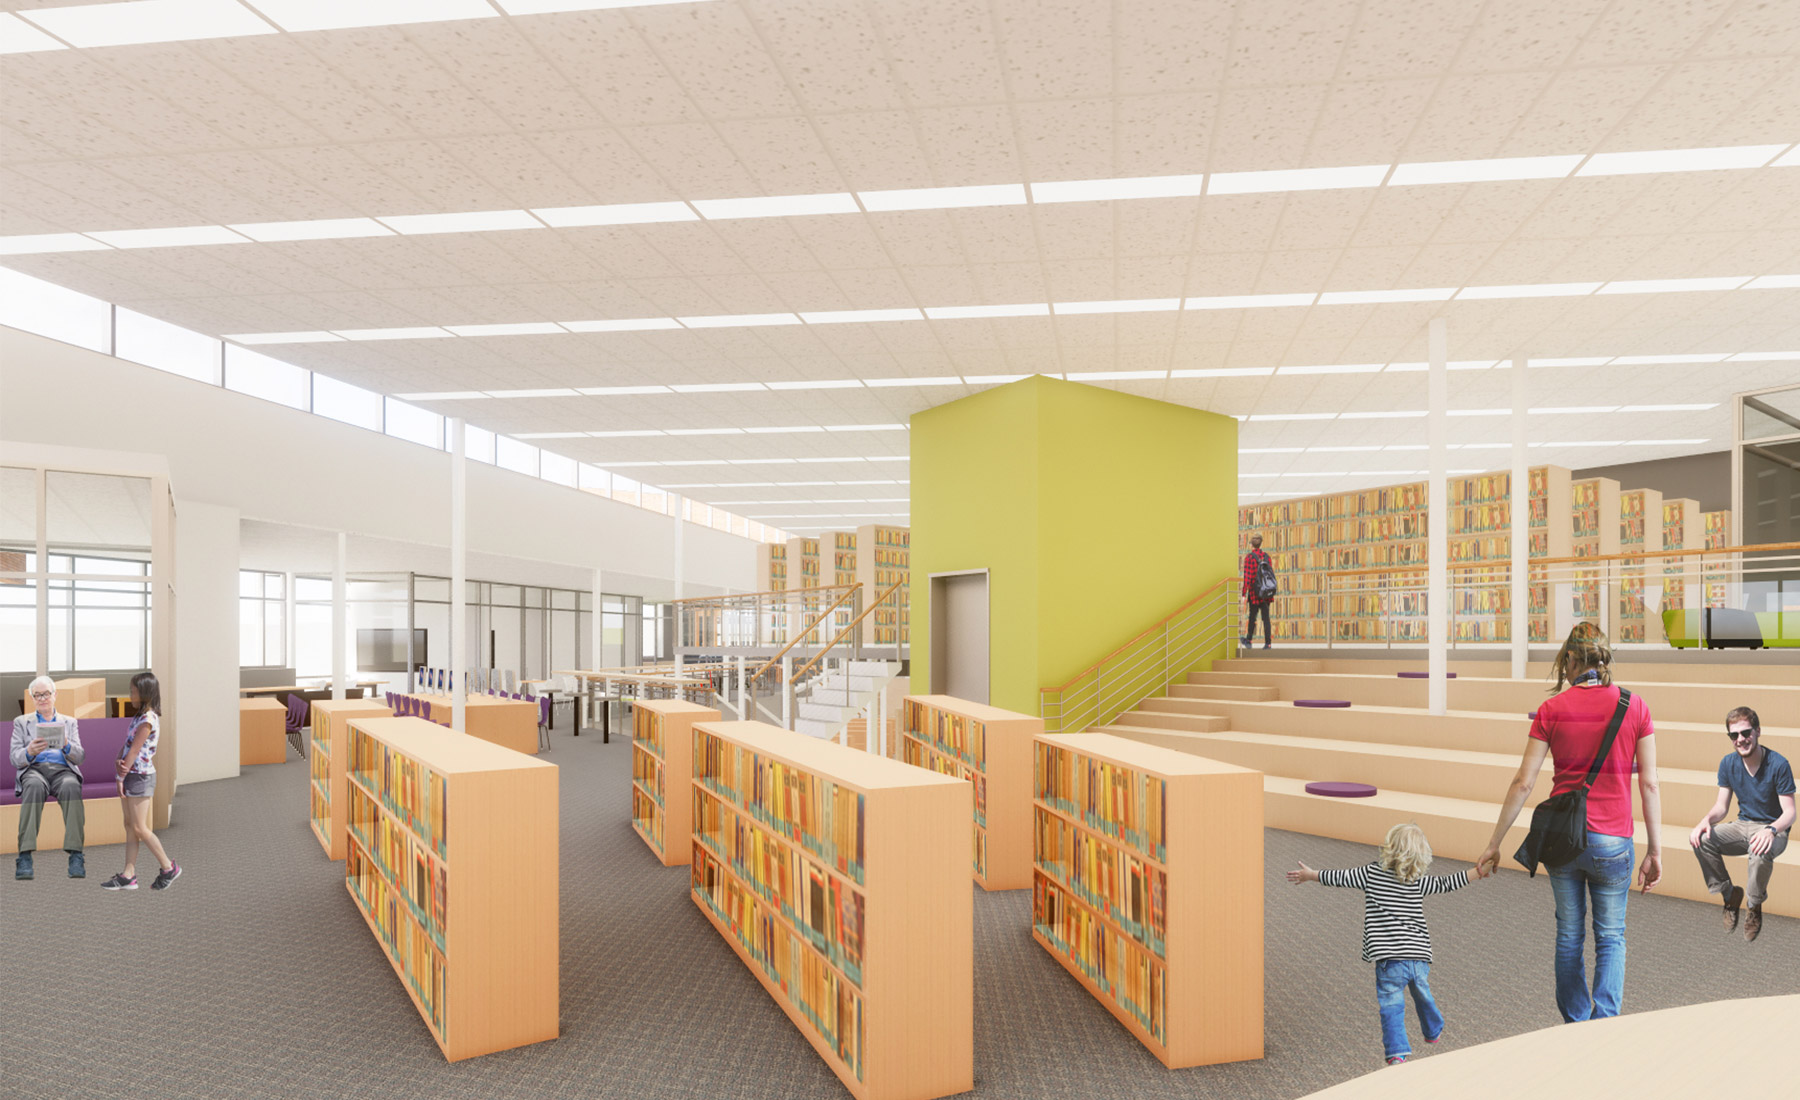 Community, Design, and Memory: Re-Designing A Childhood Library for Future Generations